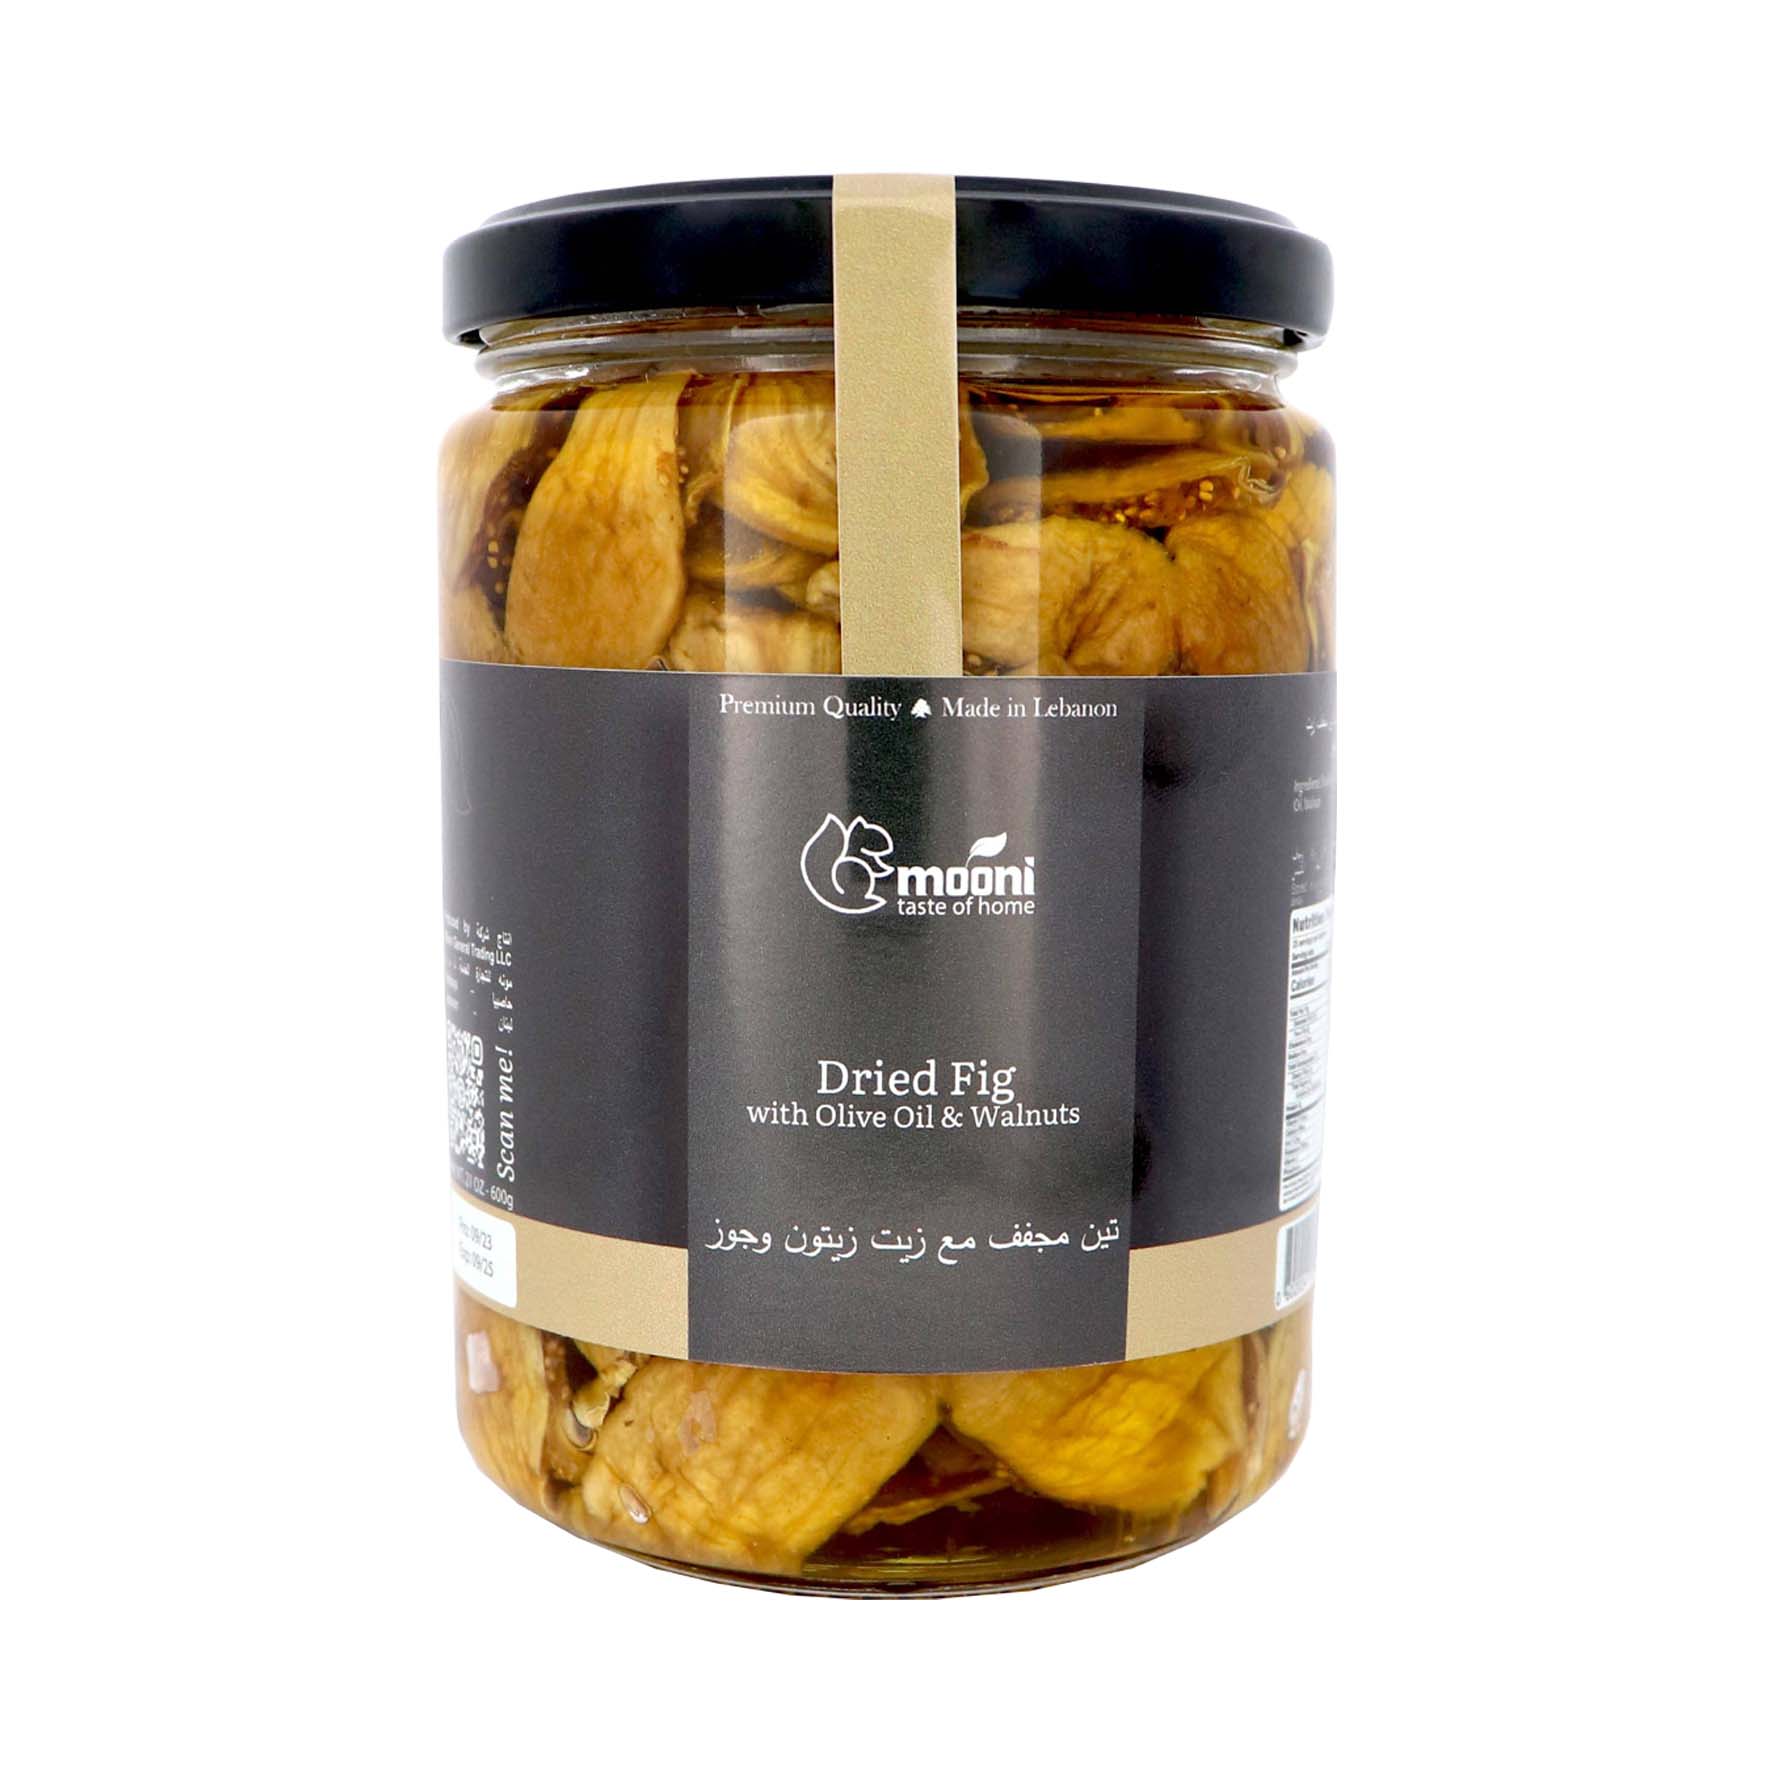 Dried Fig with Olive Oil & Walnuts – 600g